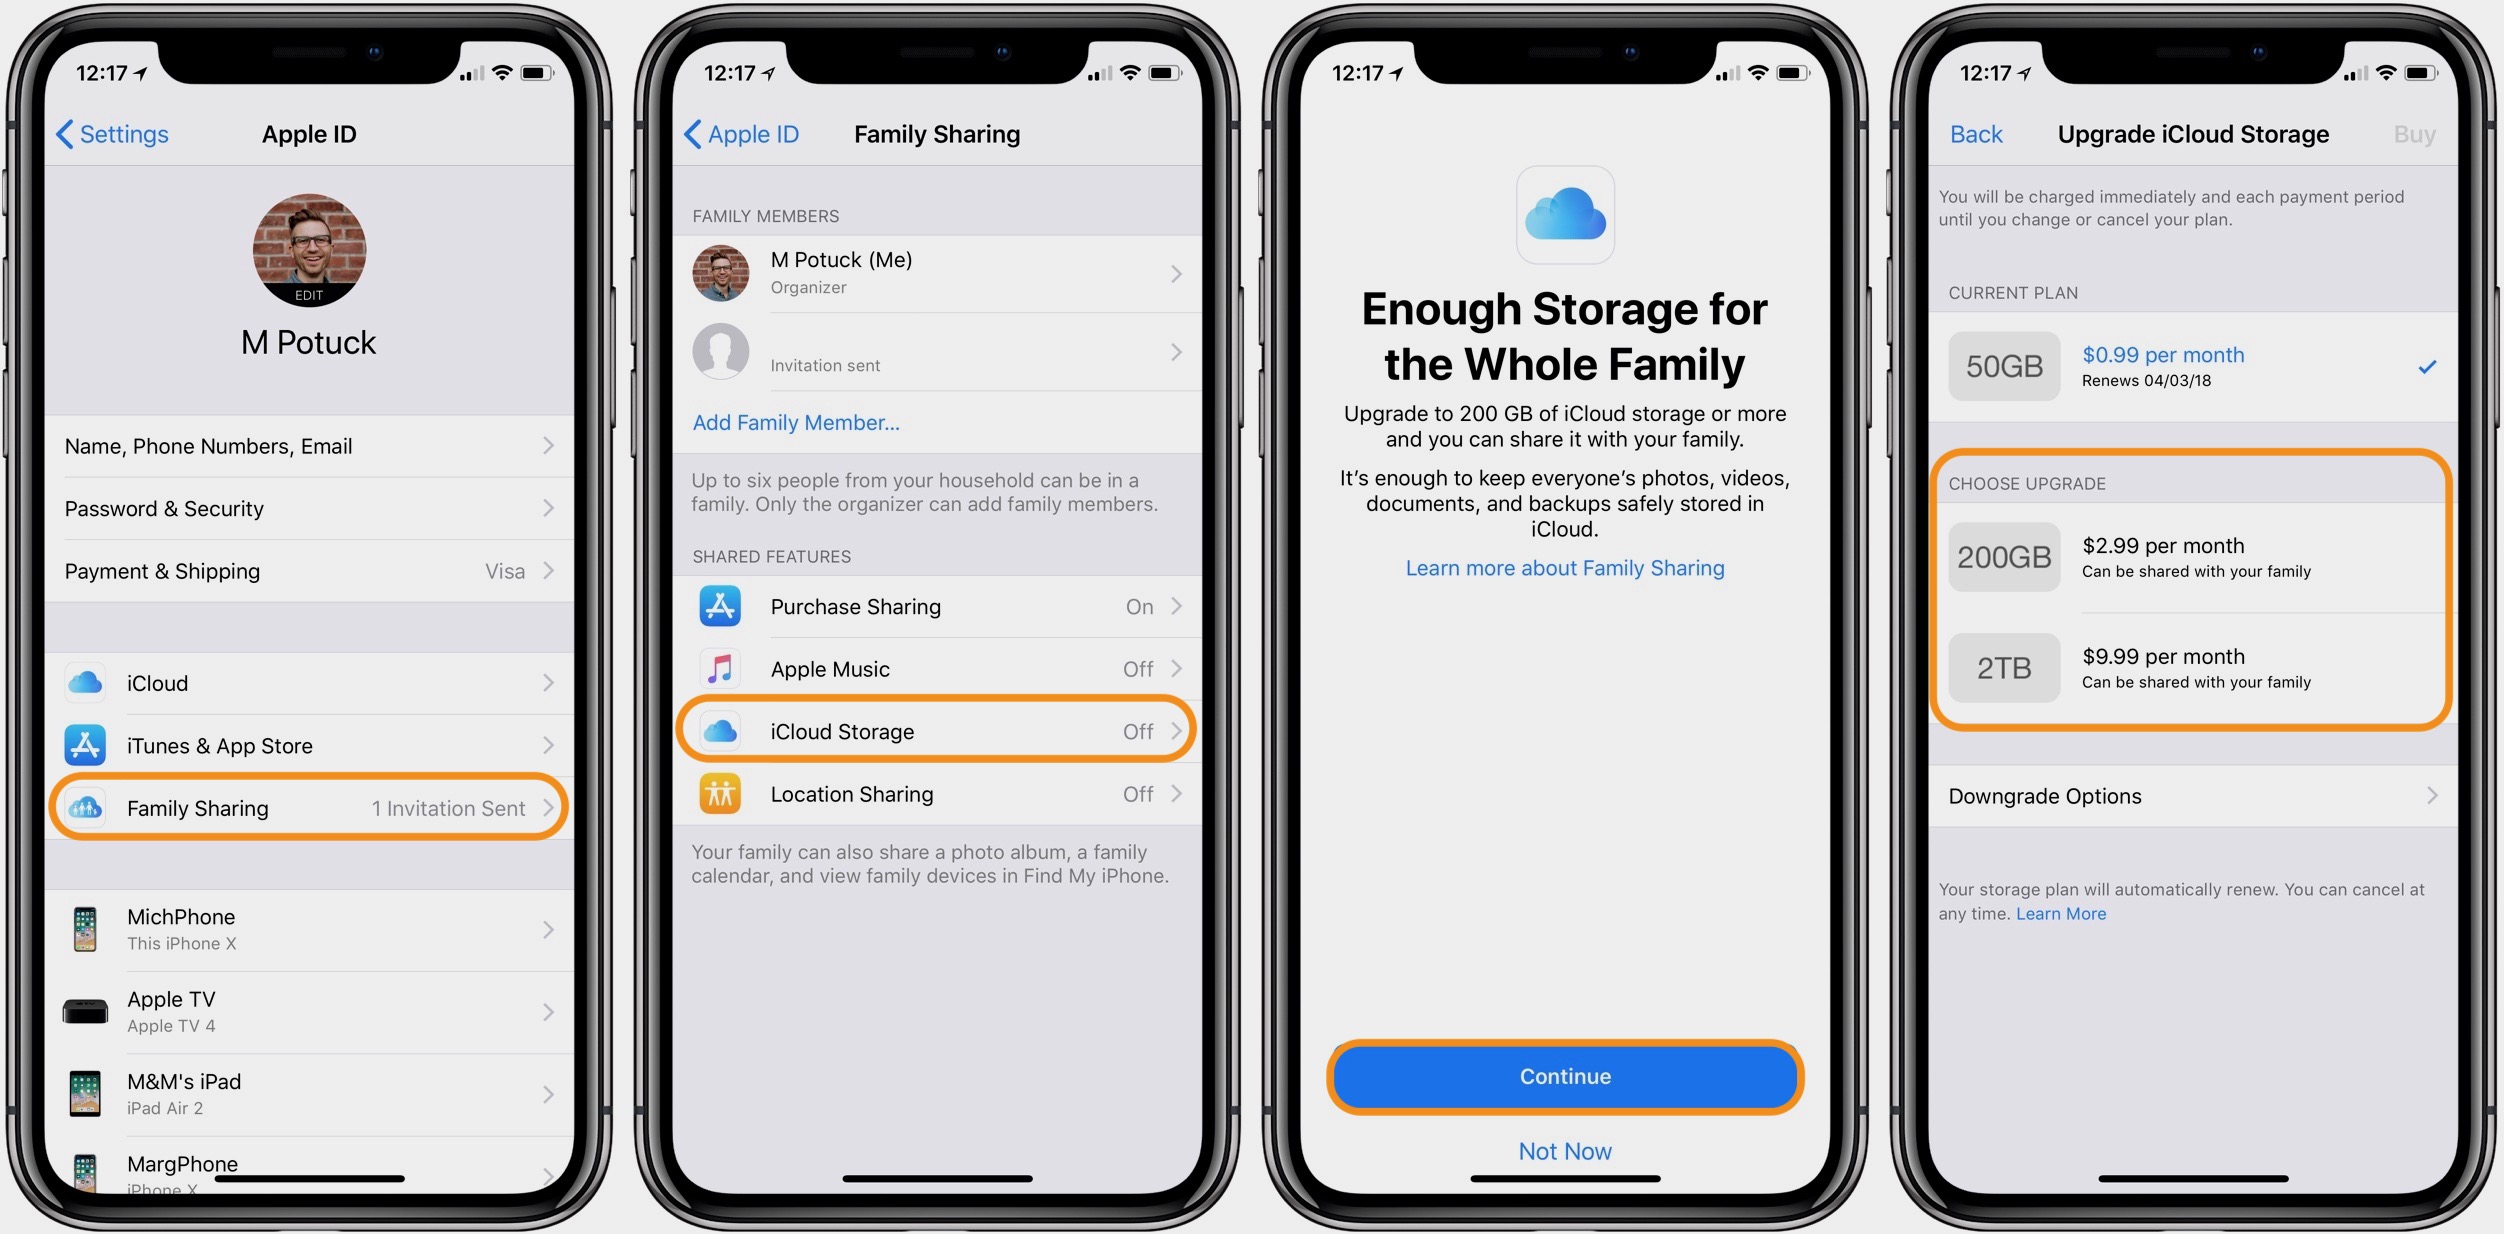 How to share one iCloud Storage plan with your whole family 9to5Mac